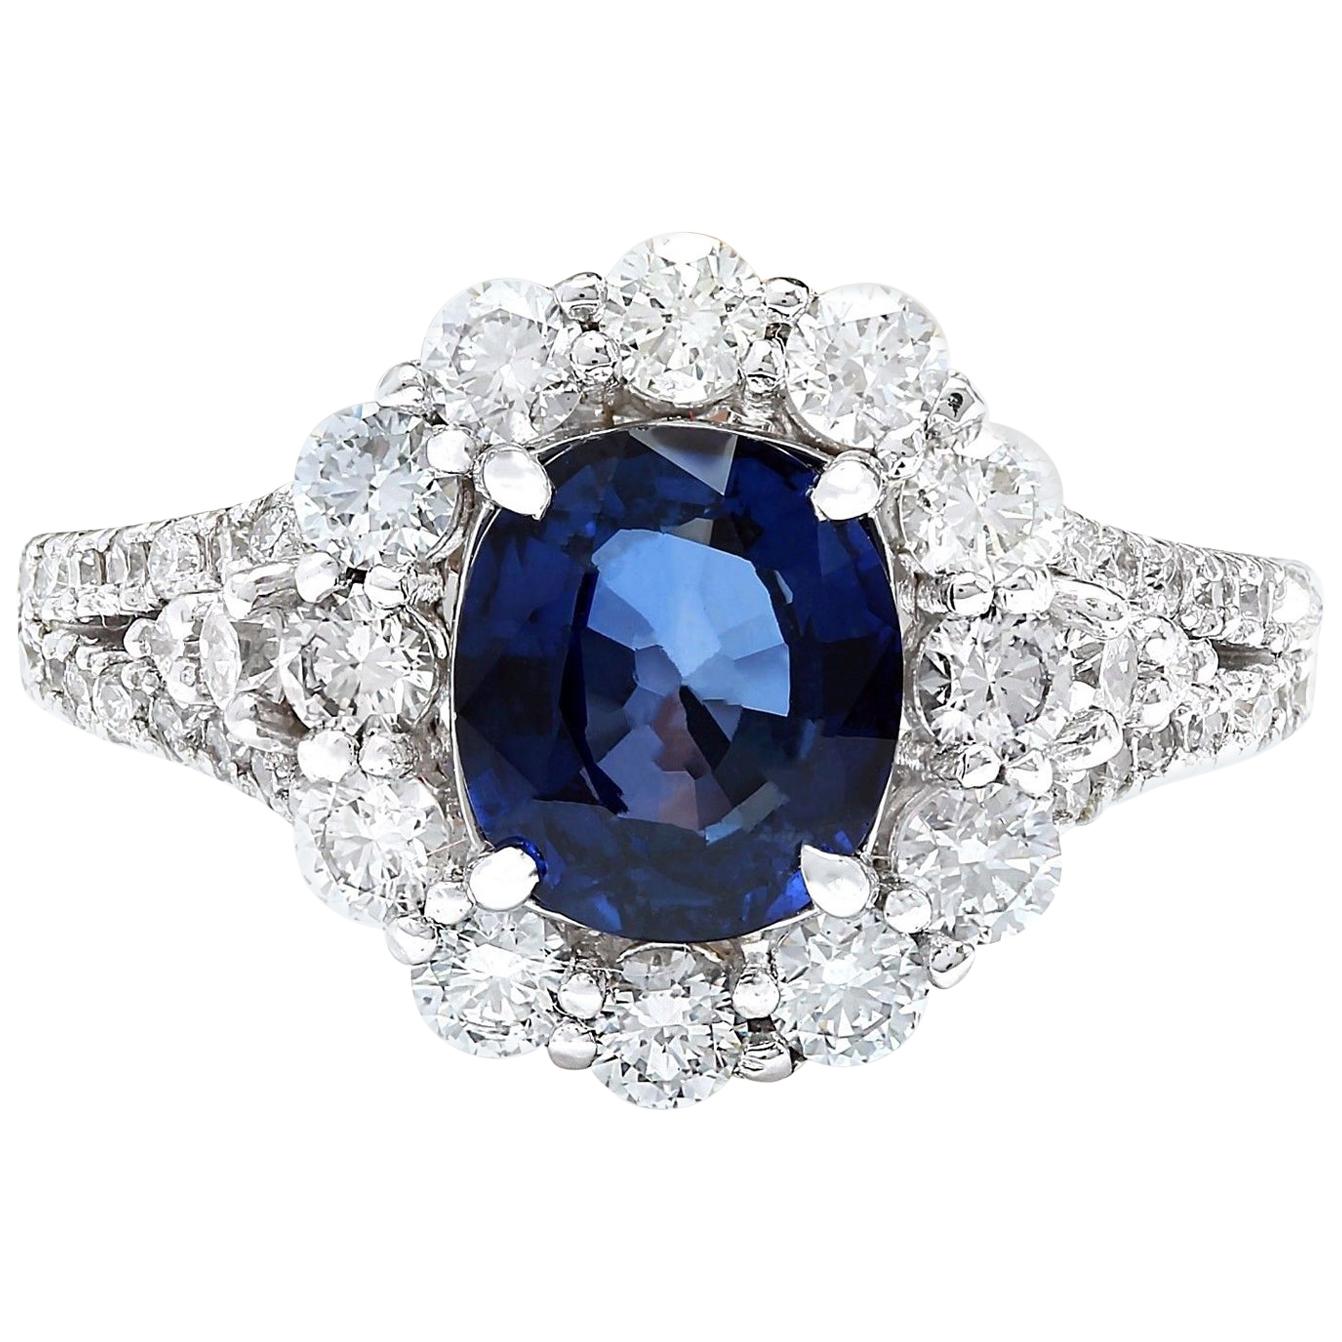 Exquisite Natural Sapphire Diamond Ring In 14 Karat Solid White Gold 